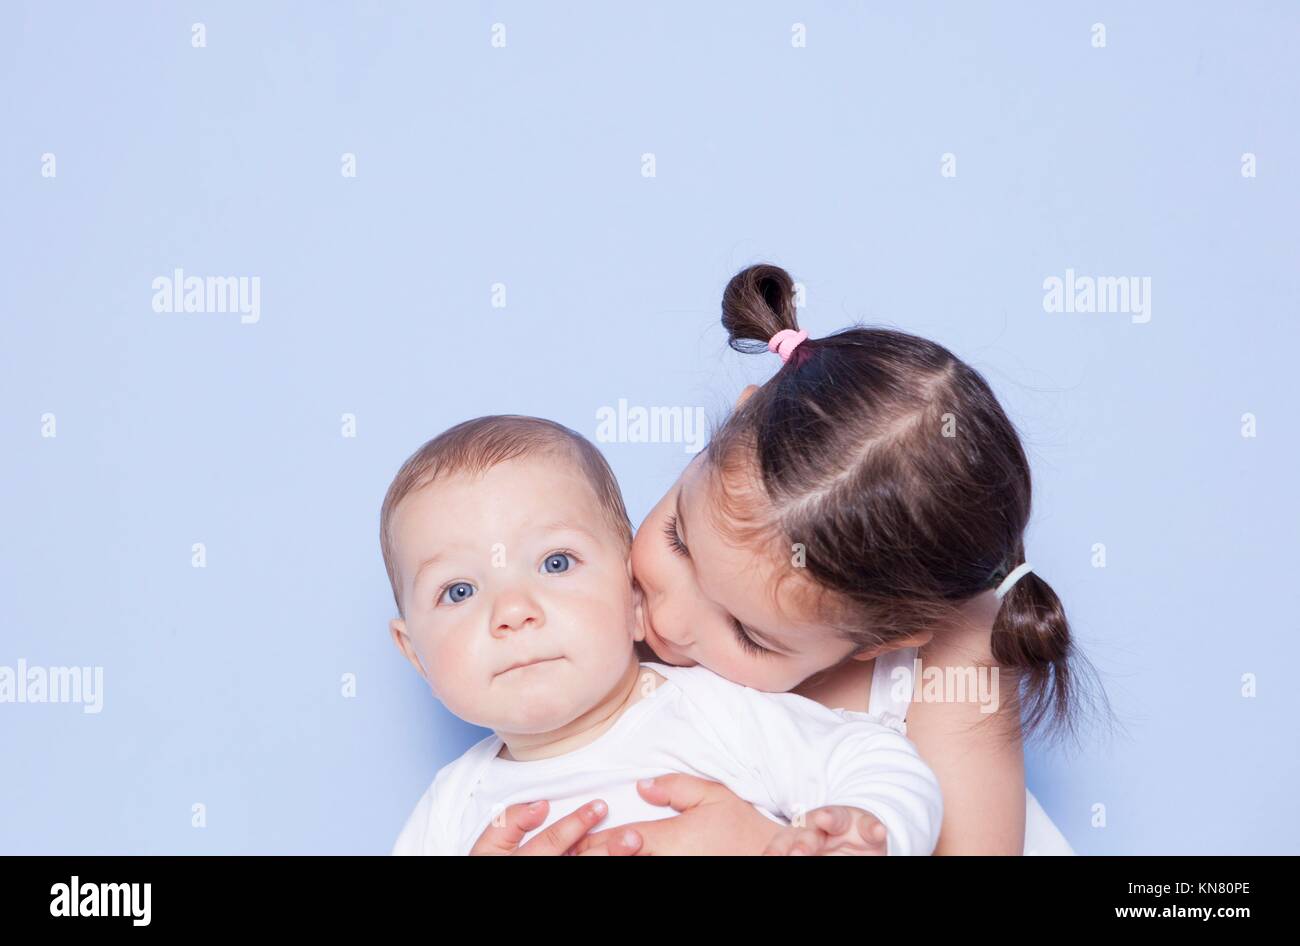 Little cute girl hugging little baby brother. Isolated over blue background. Stock Photo